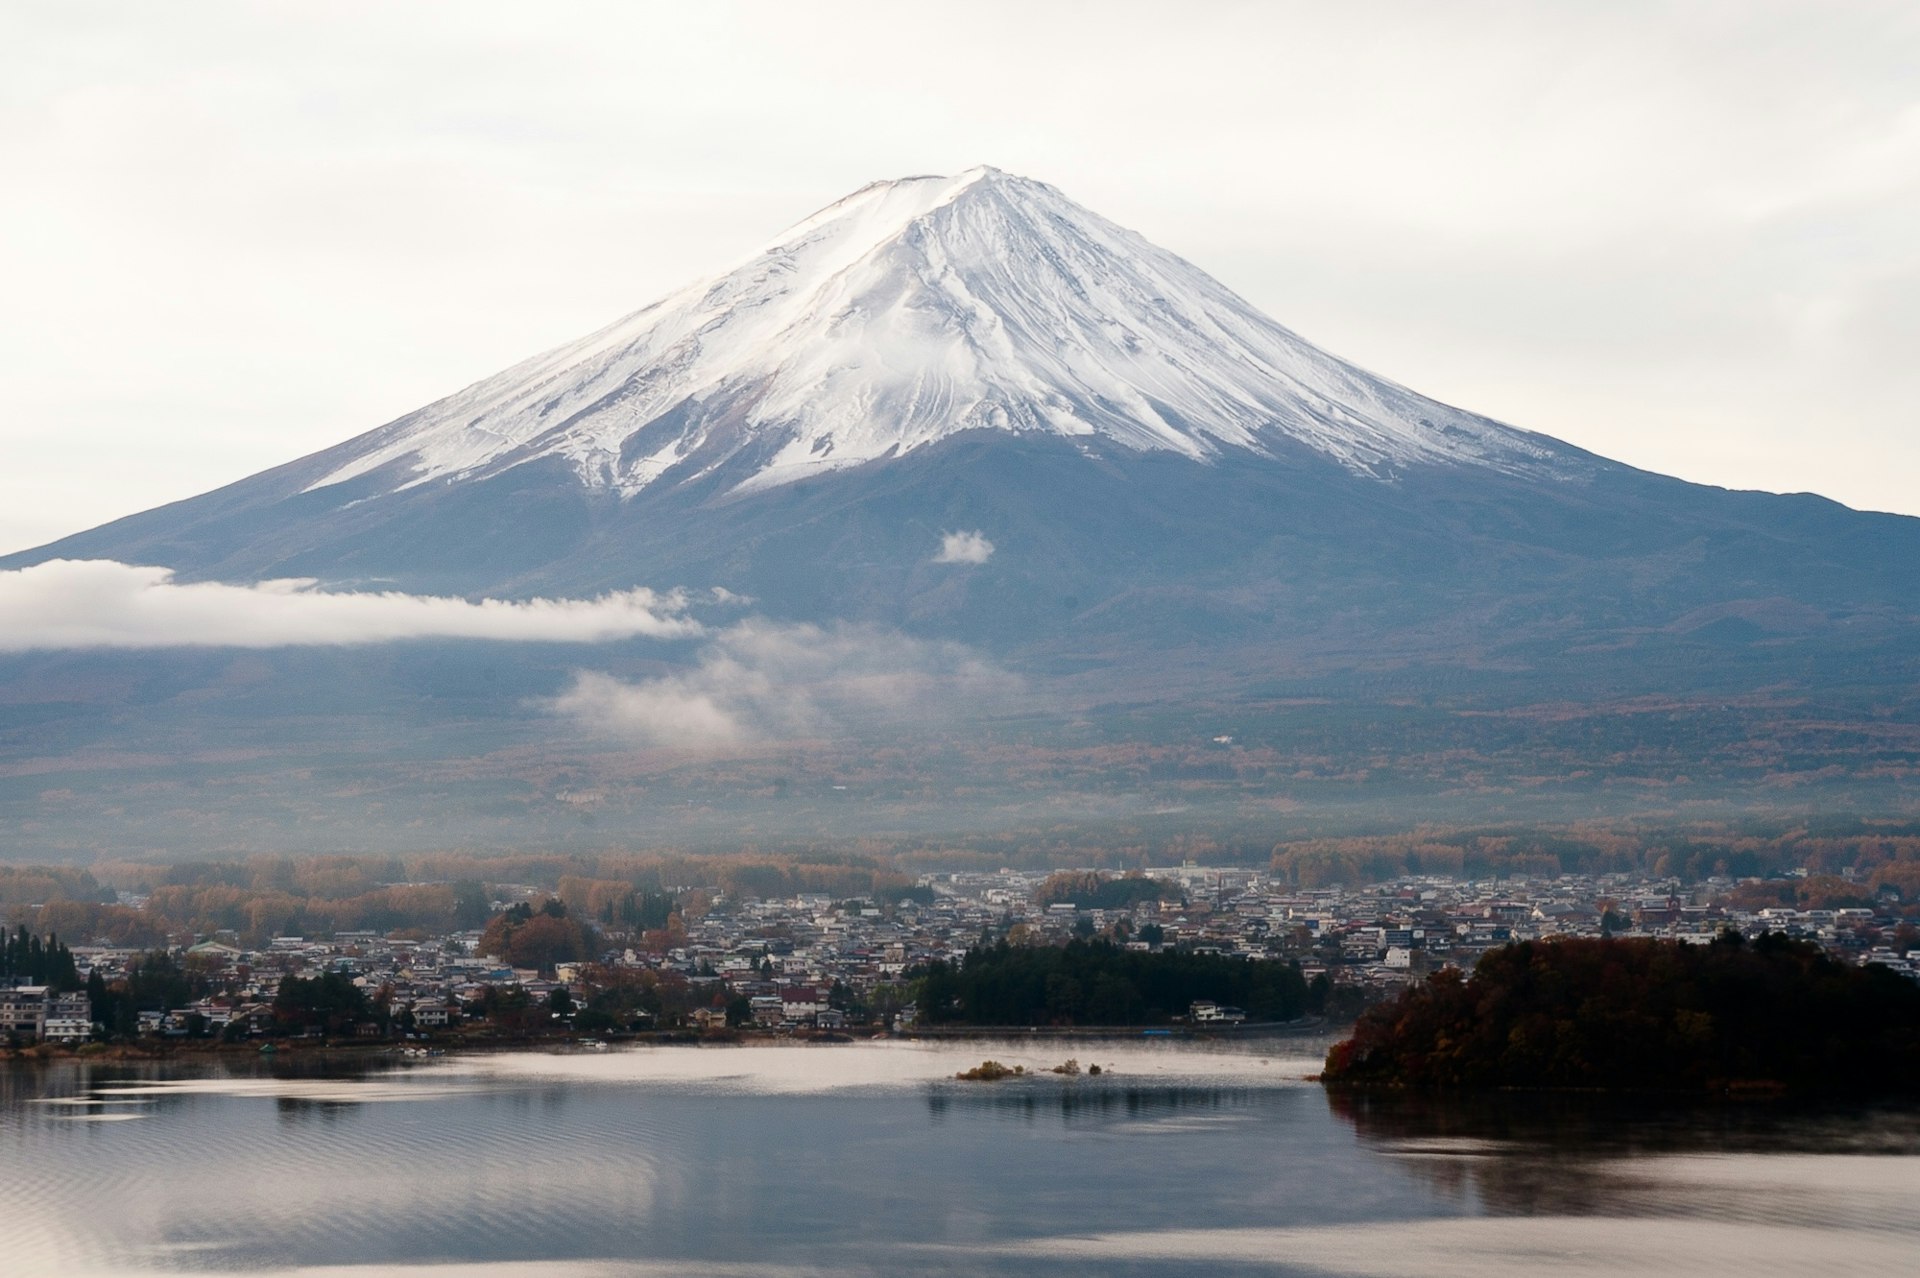 Finding peace in the shadows of Mount Fuji